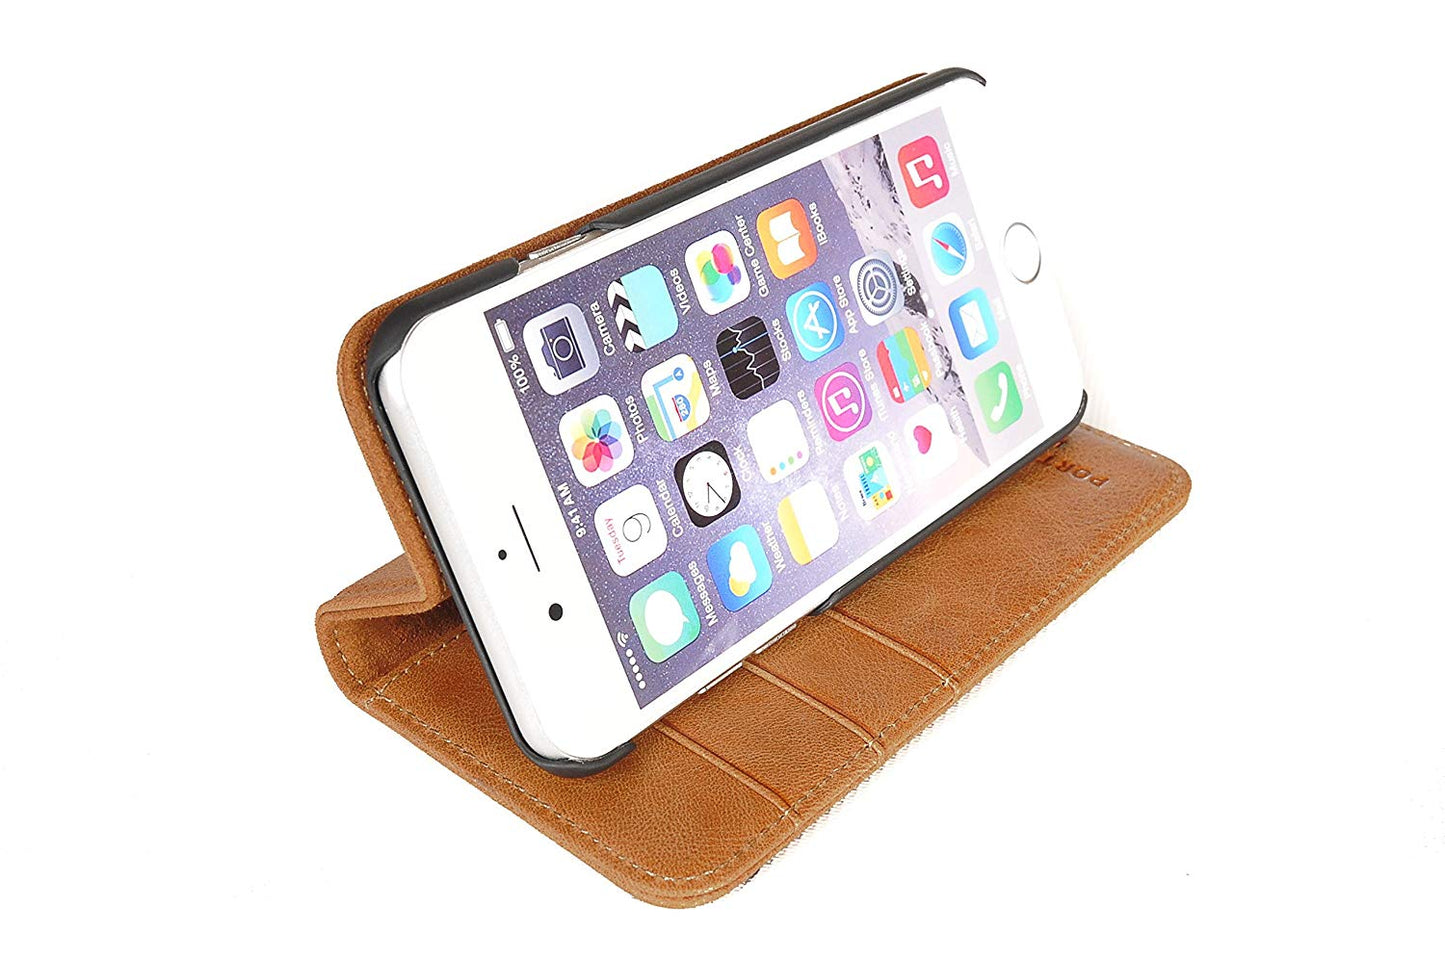 iPhone 5S / 5 Leather Case. Premium Slim Genuine Leather Stand Case/Cover/Wallet (Tan)